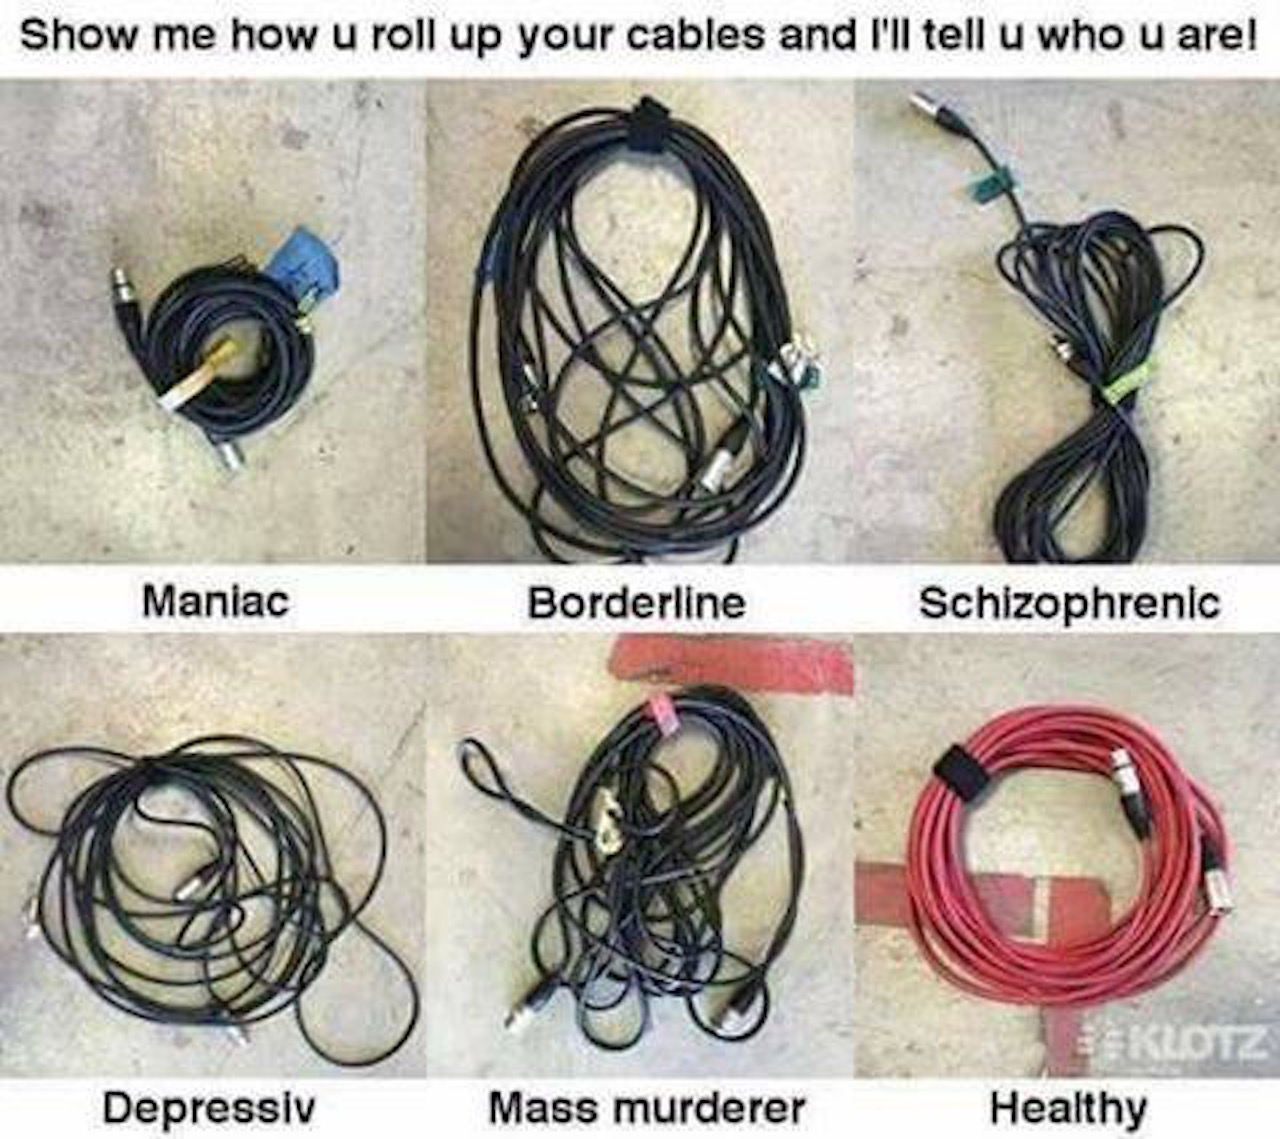 meme of wires representing different mental illnesses